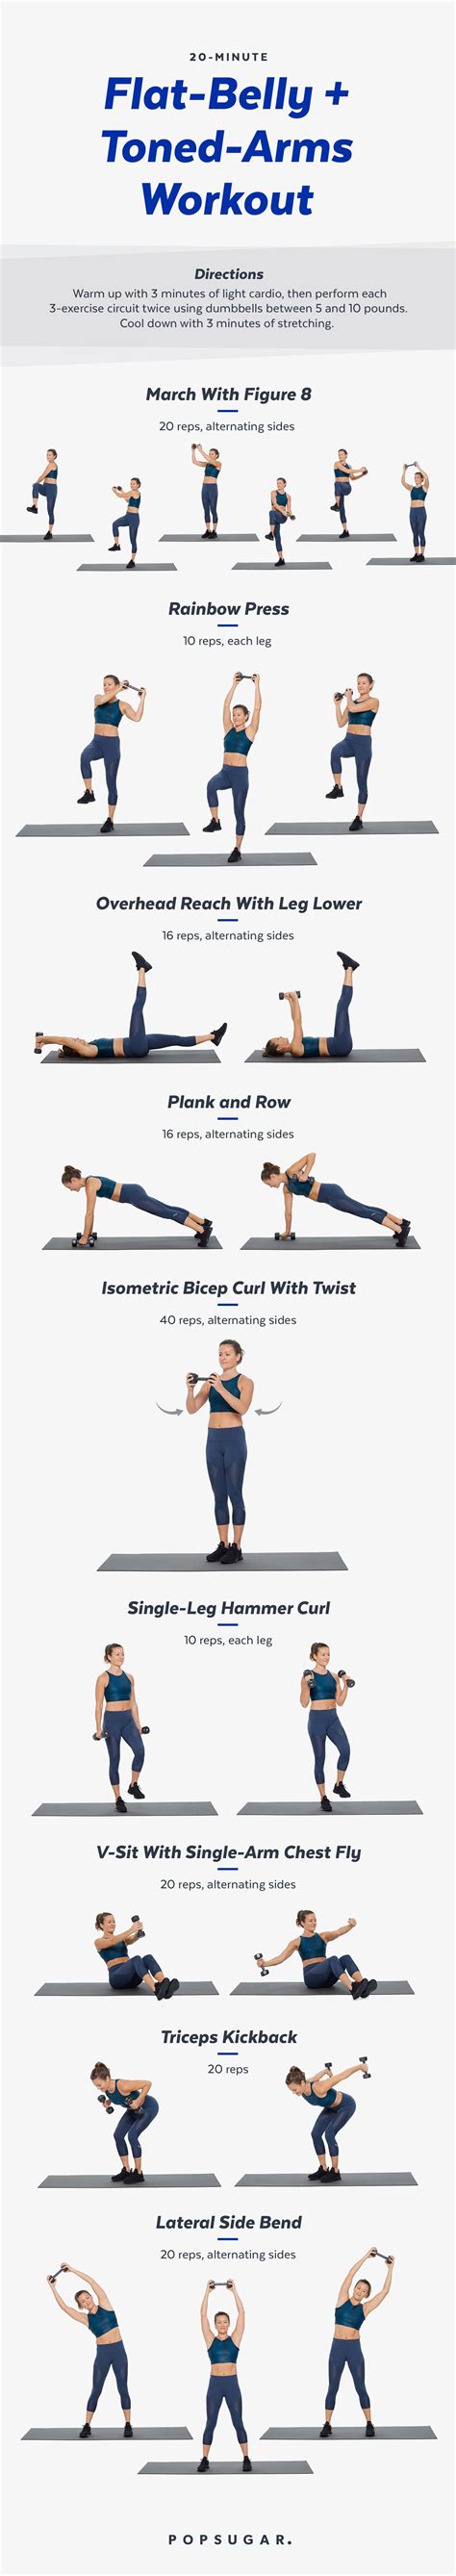 20 minute flat abs and toned arms workout popsugar fitness